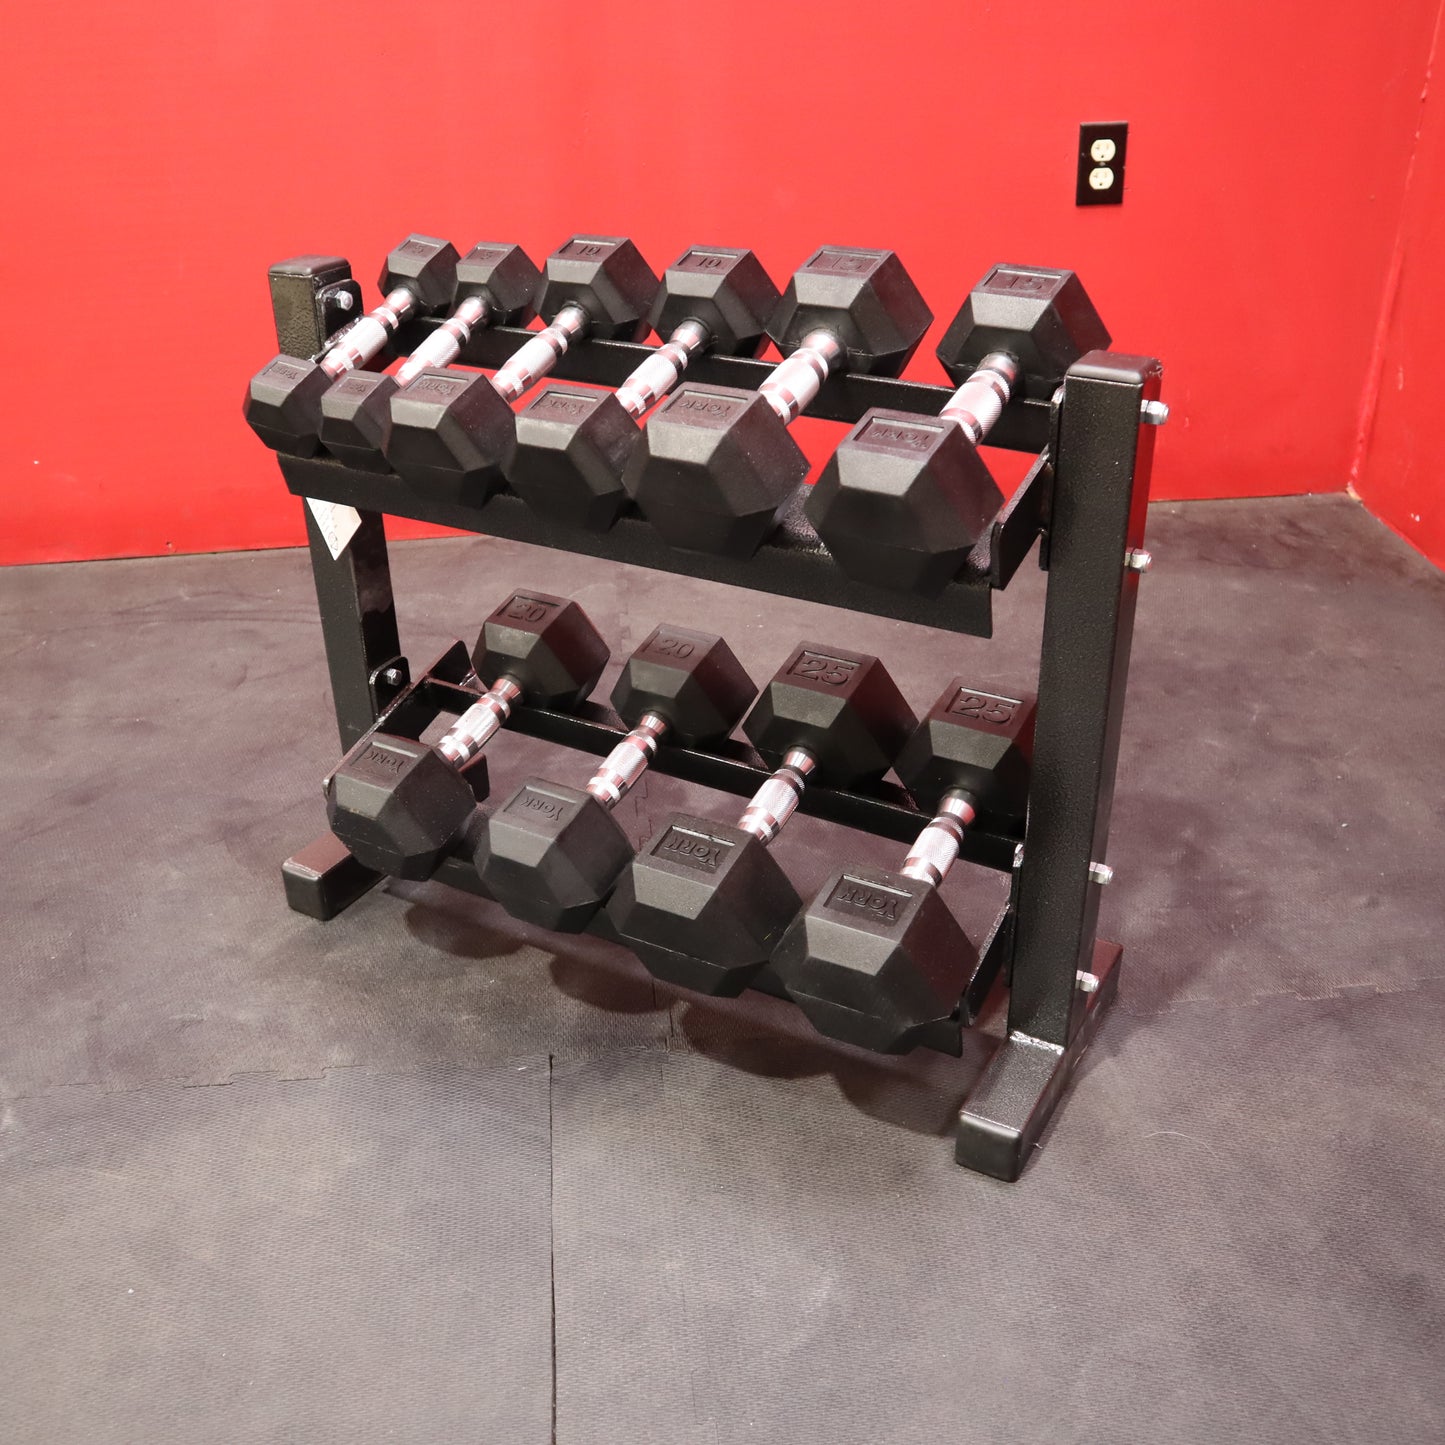 York 5-25lb Rubber Hex Dumbbell Set w/ Dumbbell Stand (Nuevo)